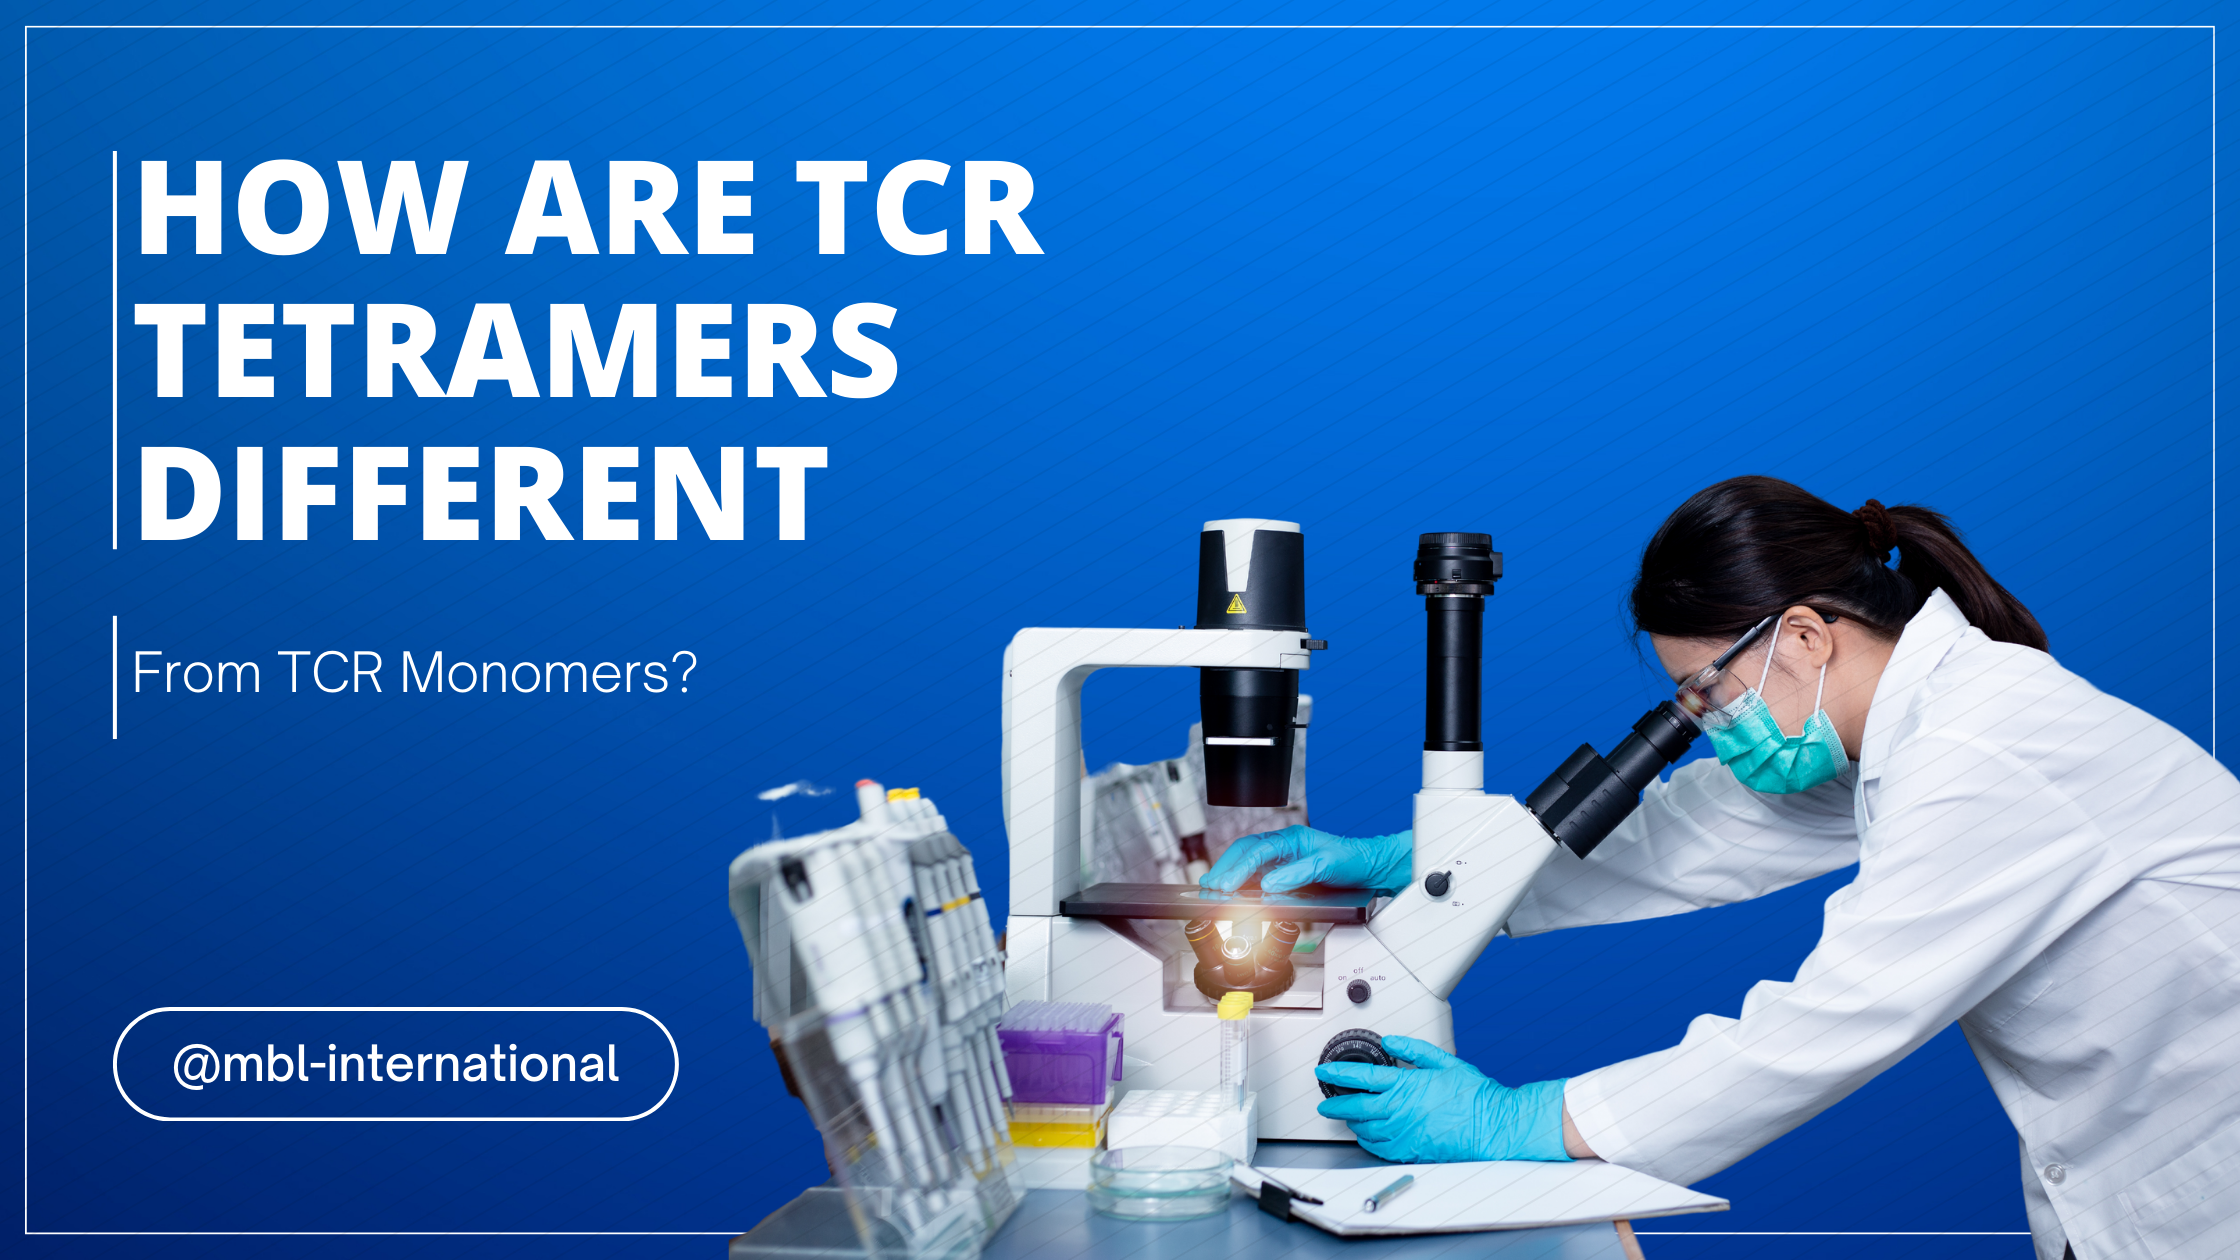 How Are TCR Tetramers Different From TCR Monomers?